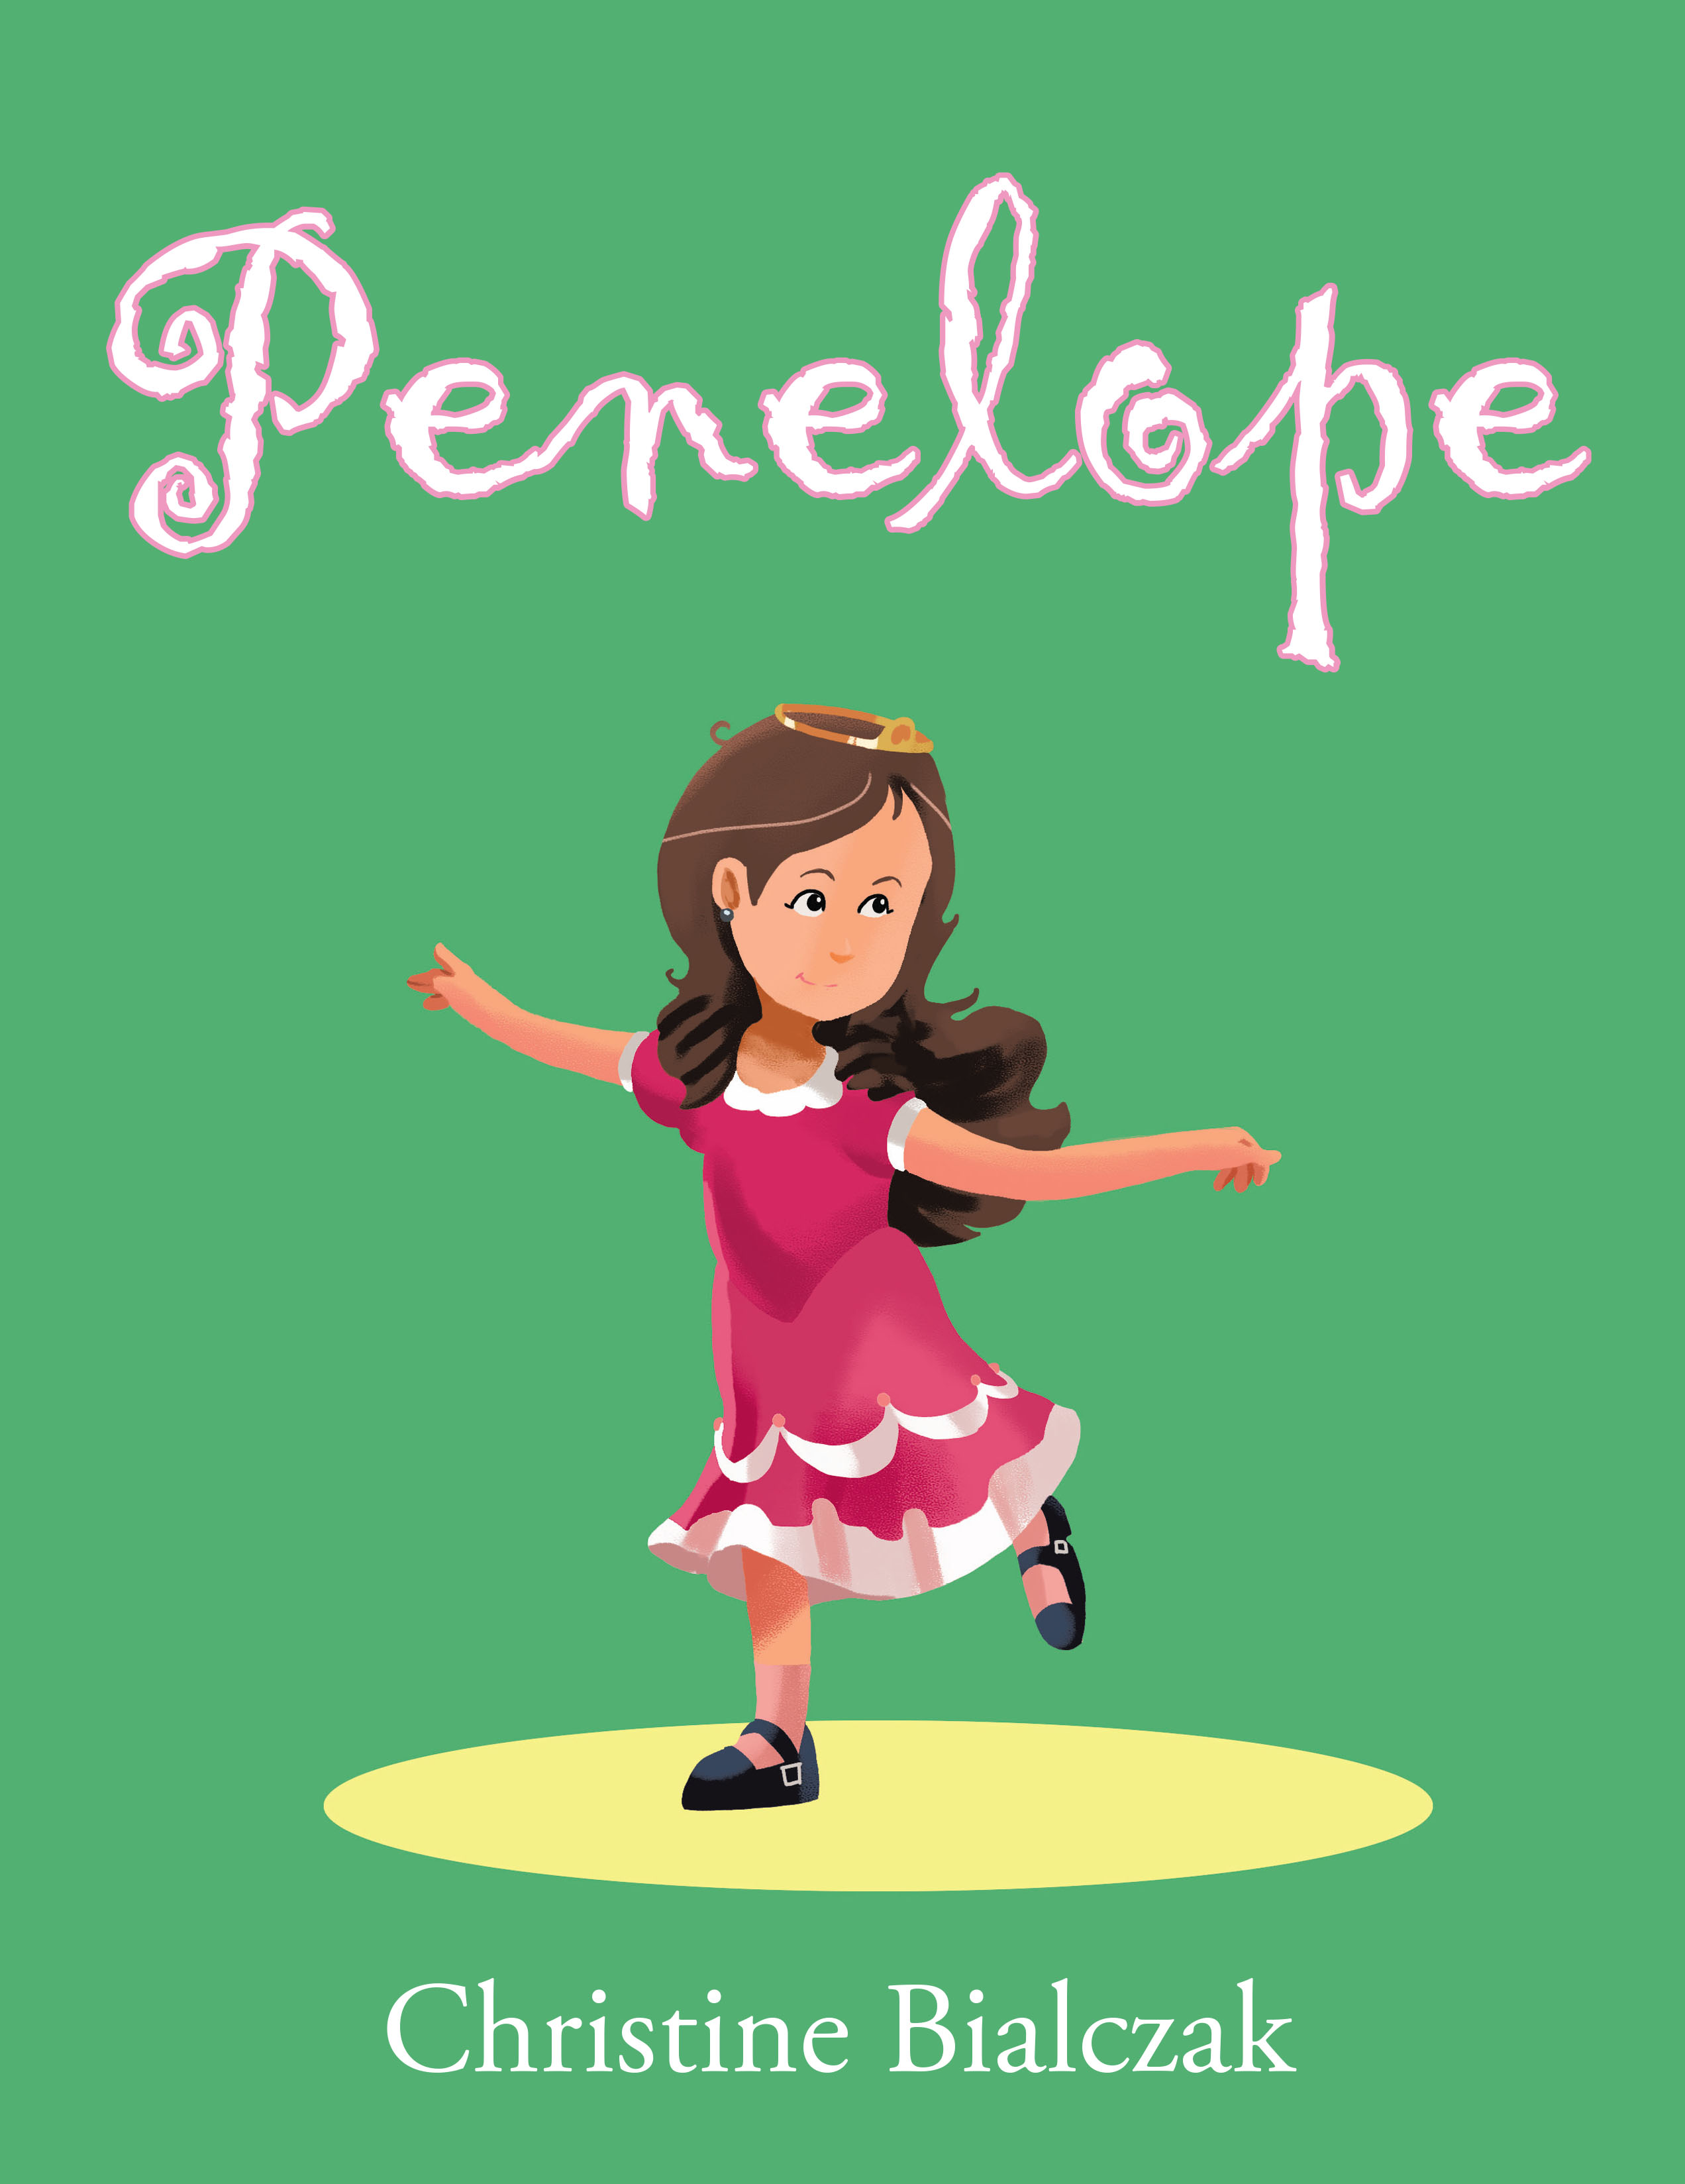 Penelope Cover Image